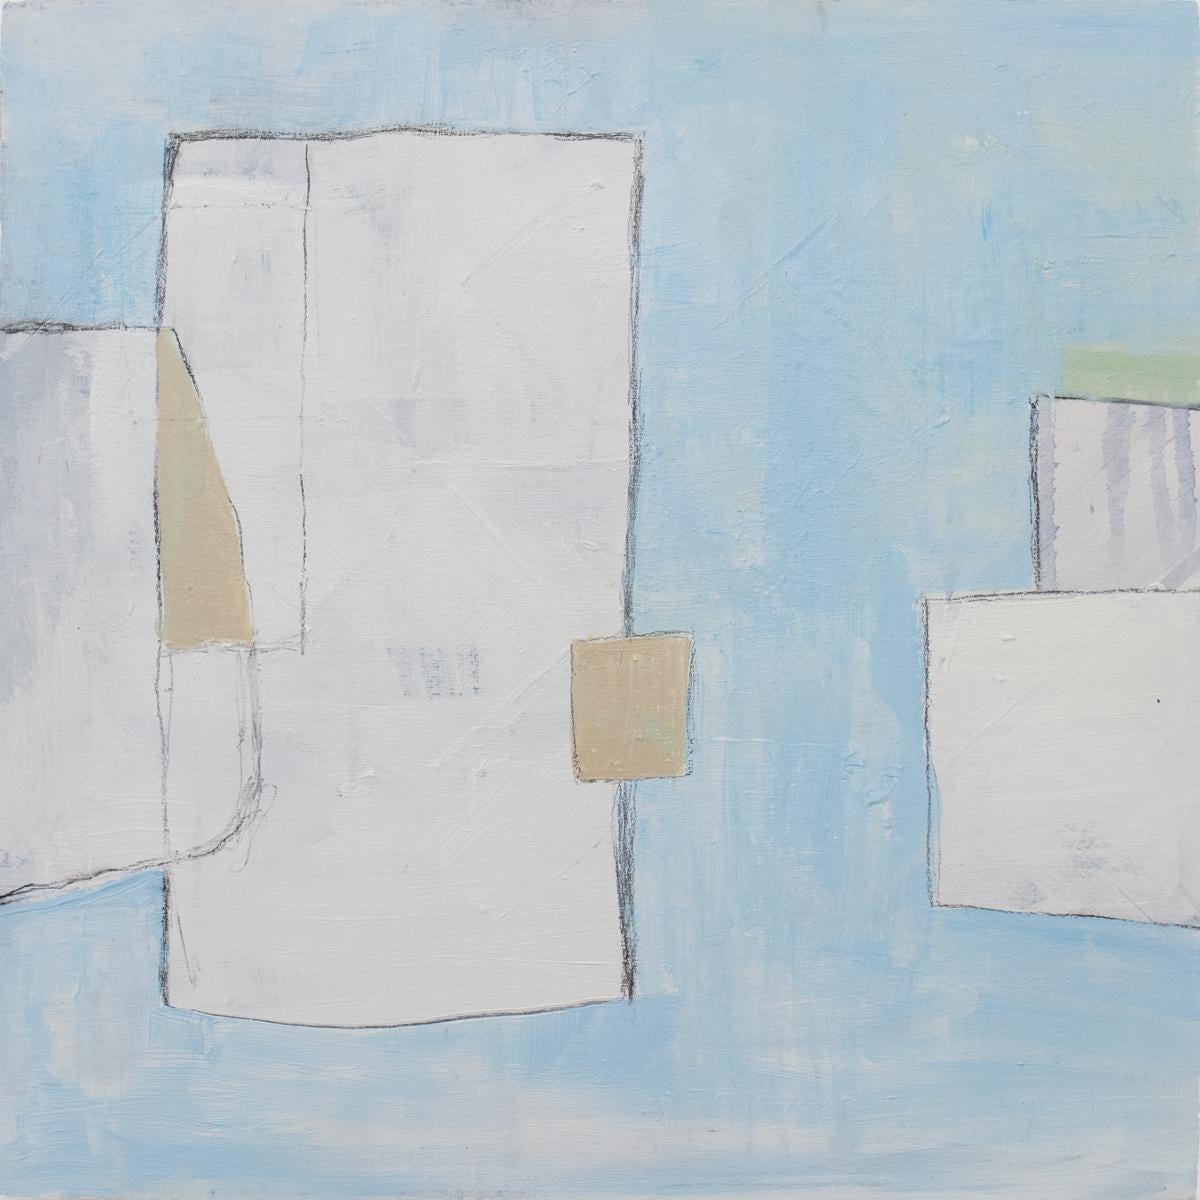 This abstract painting by Sue De Chiara features a light, white and blue palette, with green and beige accents. Imperfect rectangle shapes overlap over a light blue background, creating a balanced, minimalist composition. The painting is made with